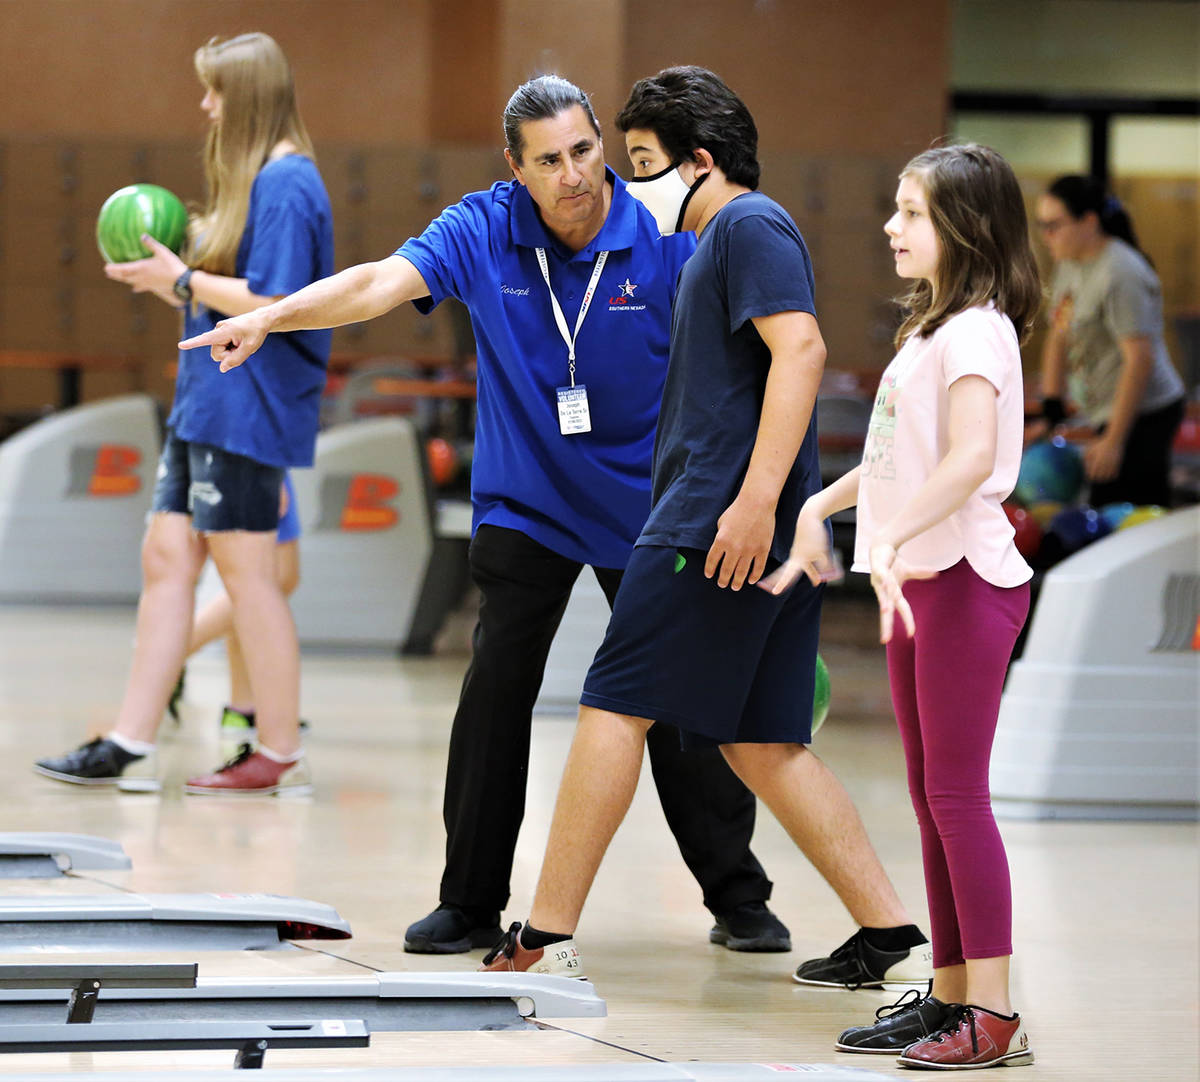 Randy Gulley/Special to the Pahrump Valley Times Joseph de la Torre instructs a young bowler du ...